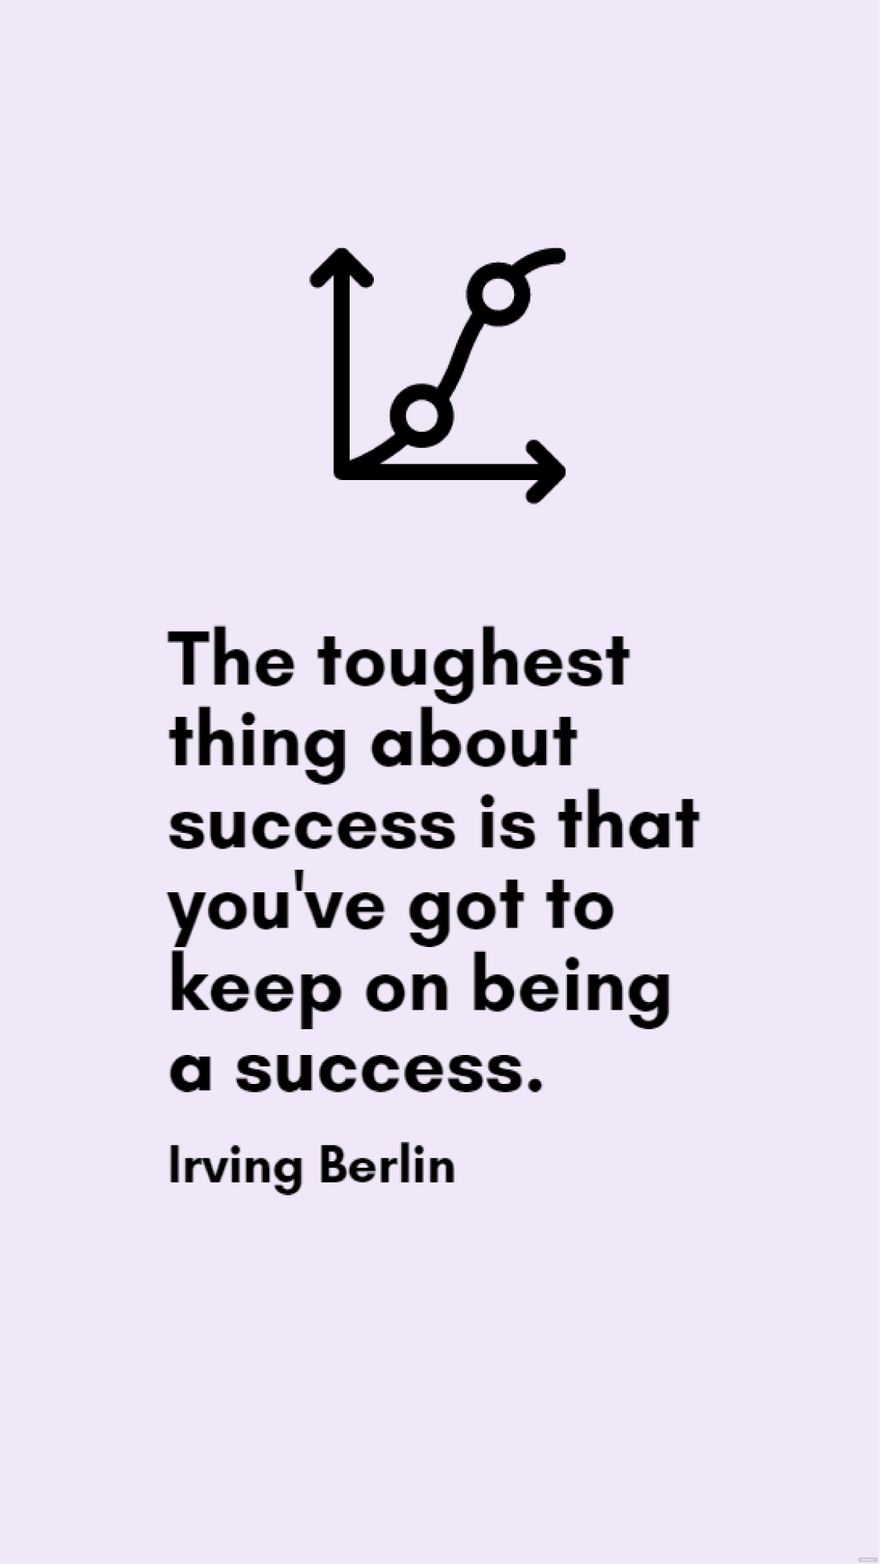 Free Irving Berlin - The toughest thing about success is that you've got to keep on being a success. in JPG